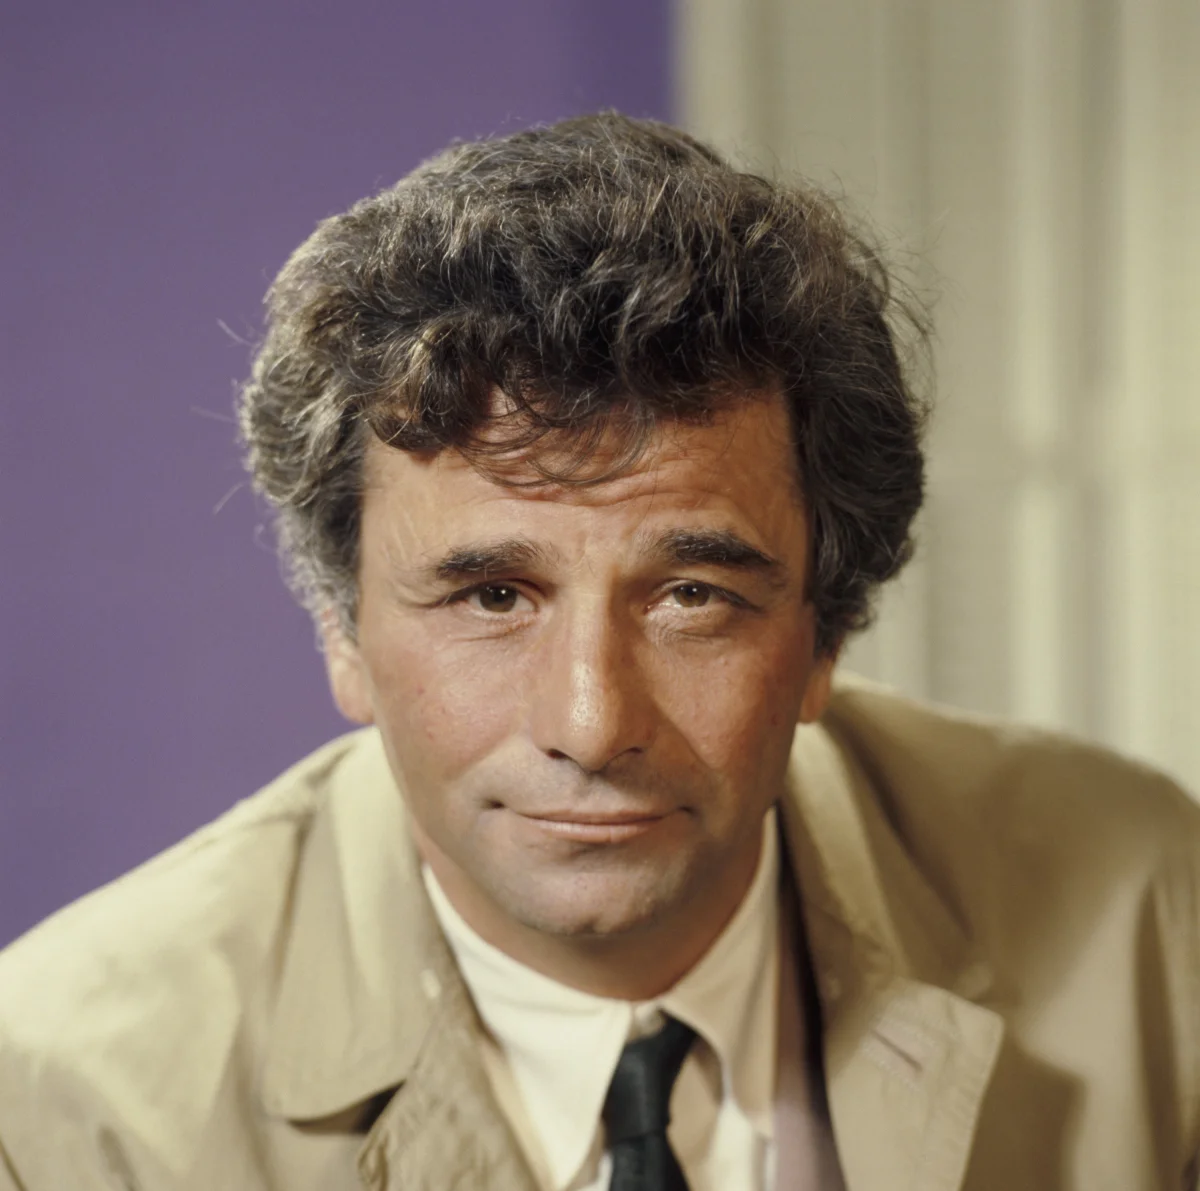 A Talk with Peter Falk